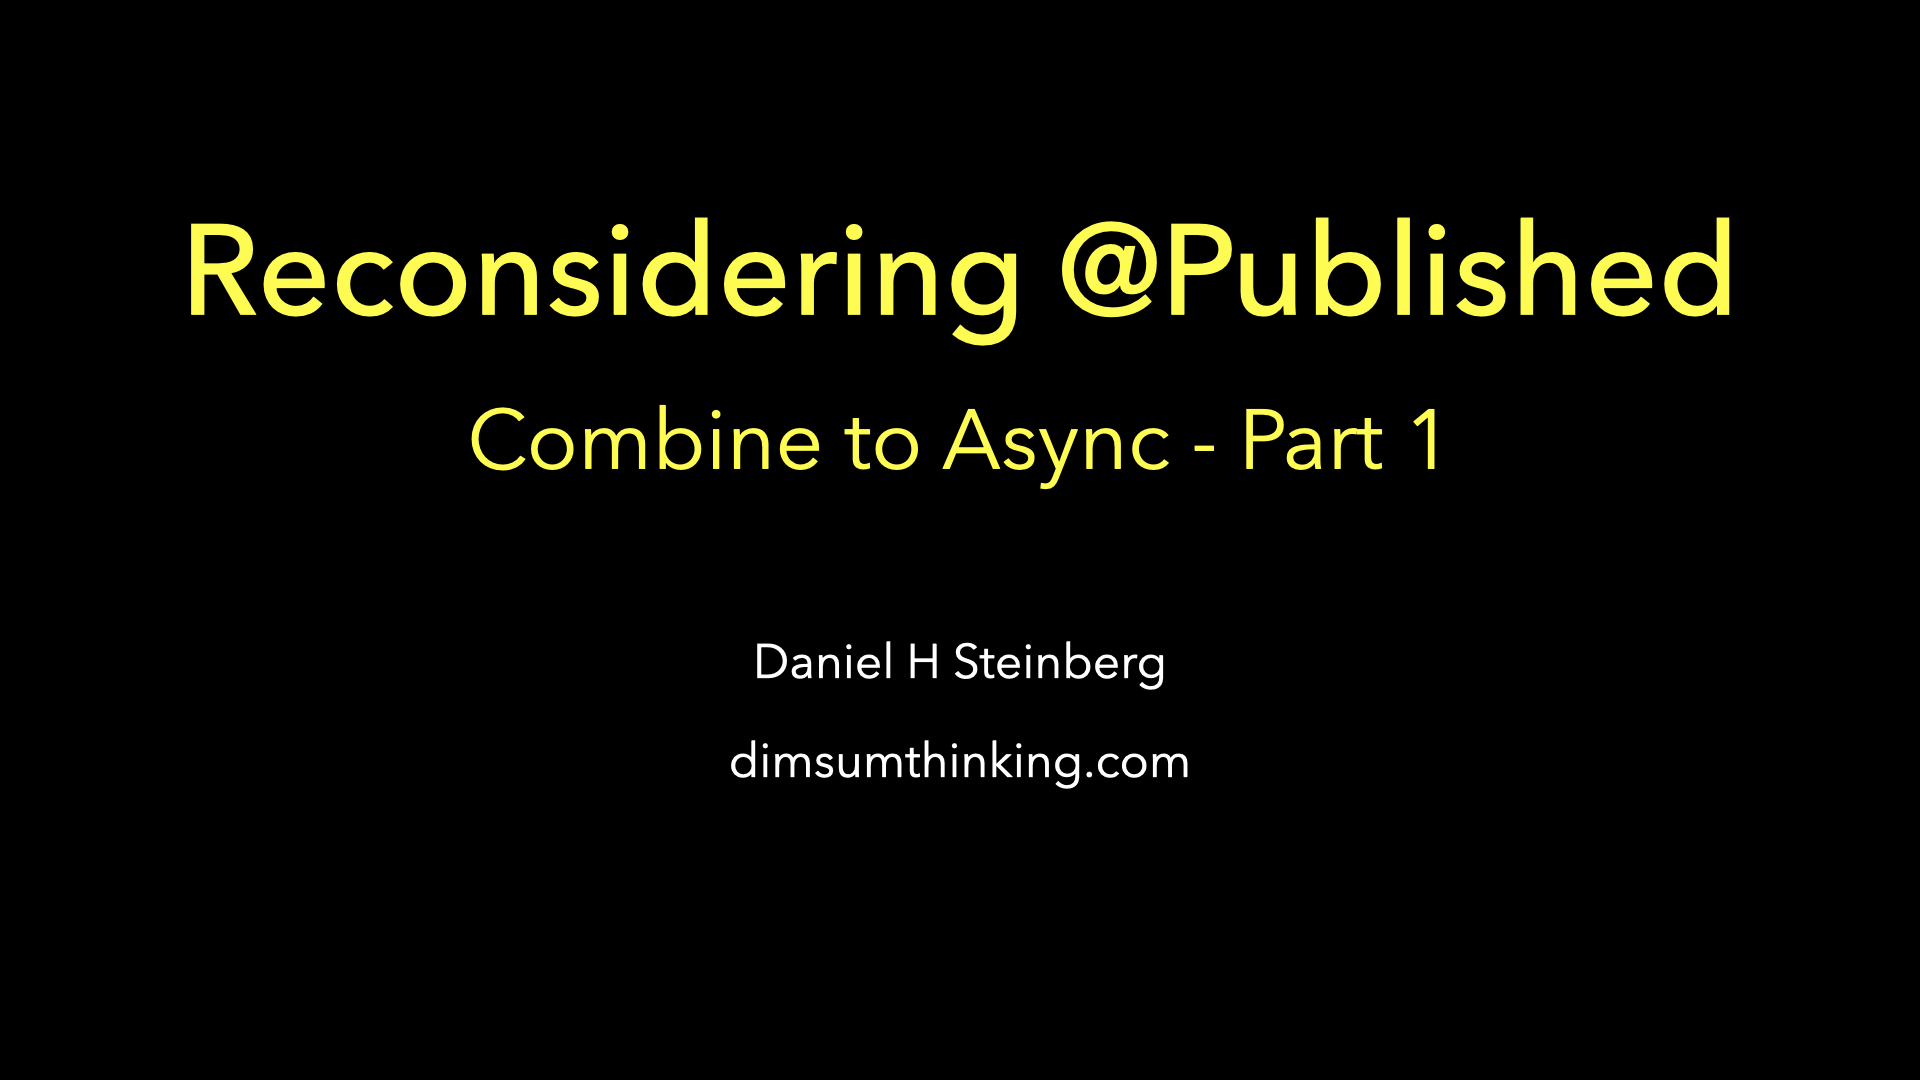 Link to Combine to Async part 1